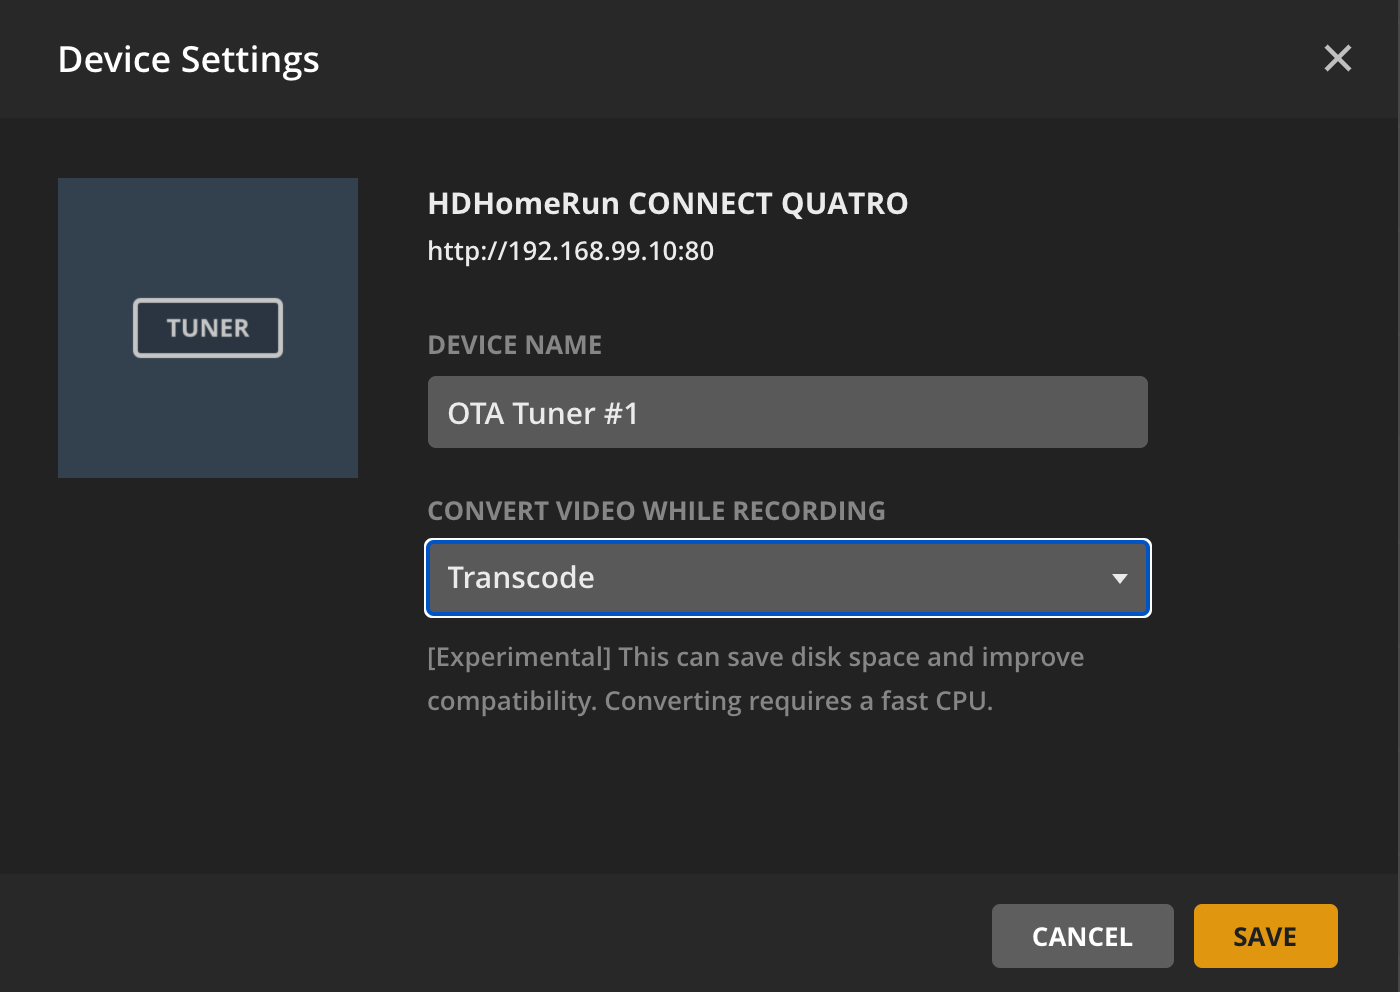 A screen allowing a user to adjust settings for most HDHomeRun tuners. The device name can be set, as well as Transcode settings.